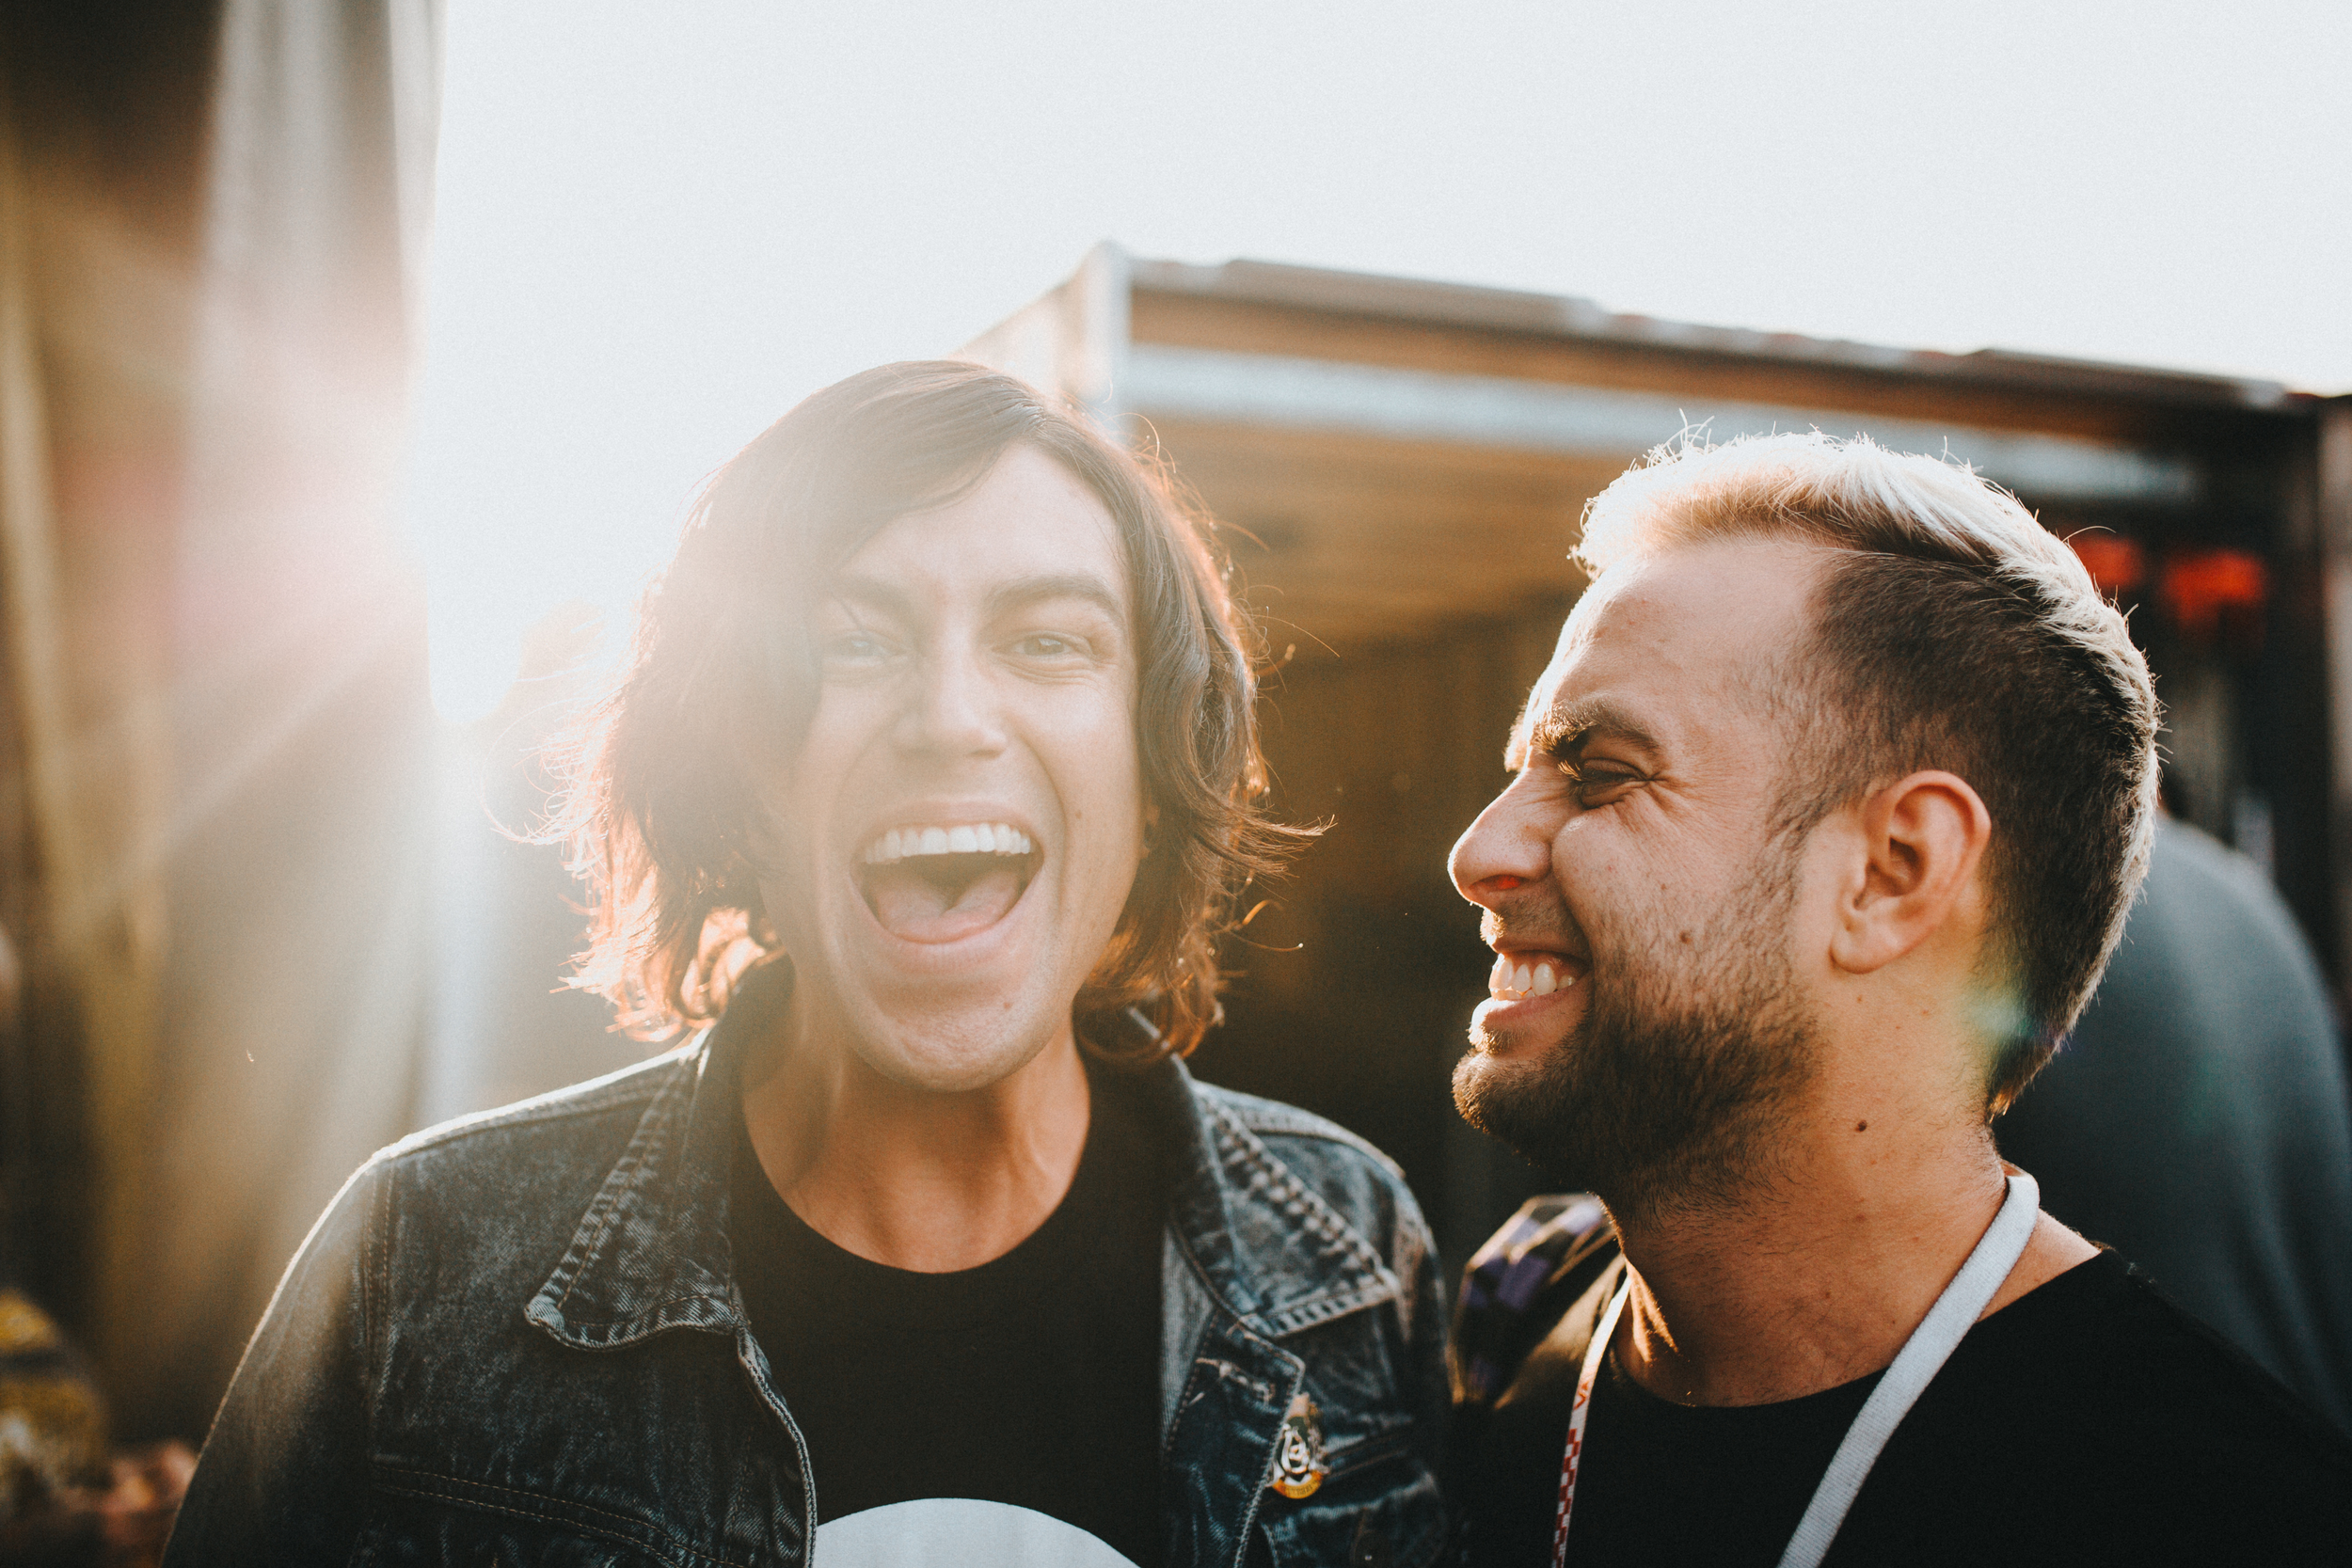   Darien Center, NY.&nbsp; Tyler Carter from  Issues  and Kellin goofing around backstage. Two incredible vocalists&nbsp; 